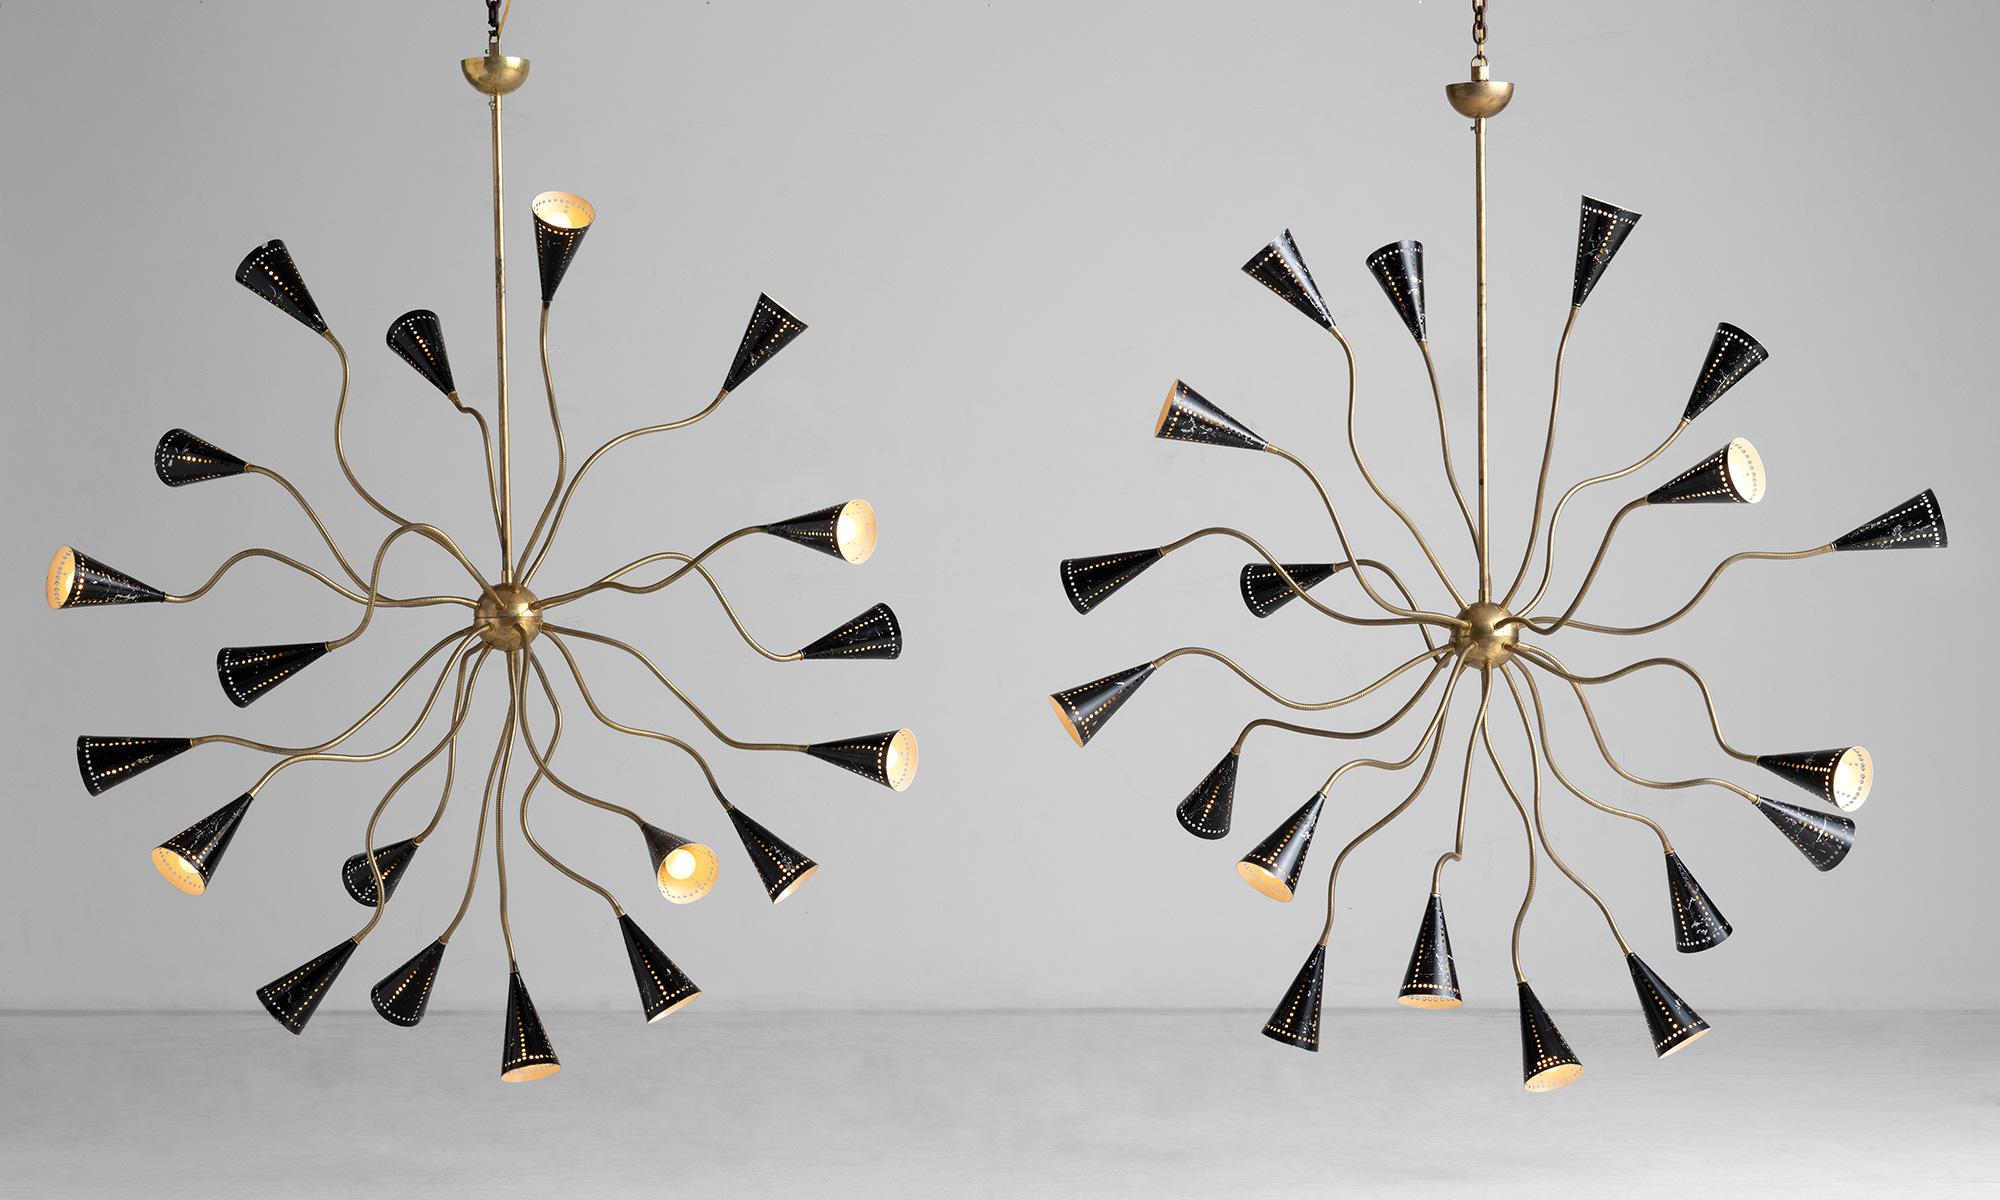 *Please note the price is per unit, and the lights are sold individually*

Massive ‘Medusa’ Chandelier

Italy circa 1960

Perforated black metal shades on adjustable brass arms.

Measures: 60”diameter x 72”h (as shown).